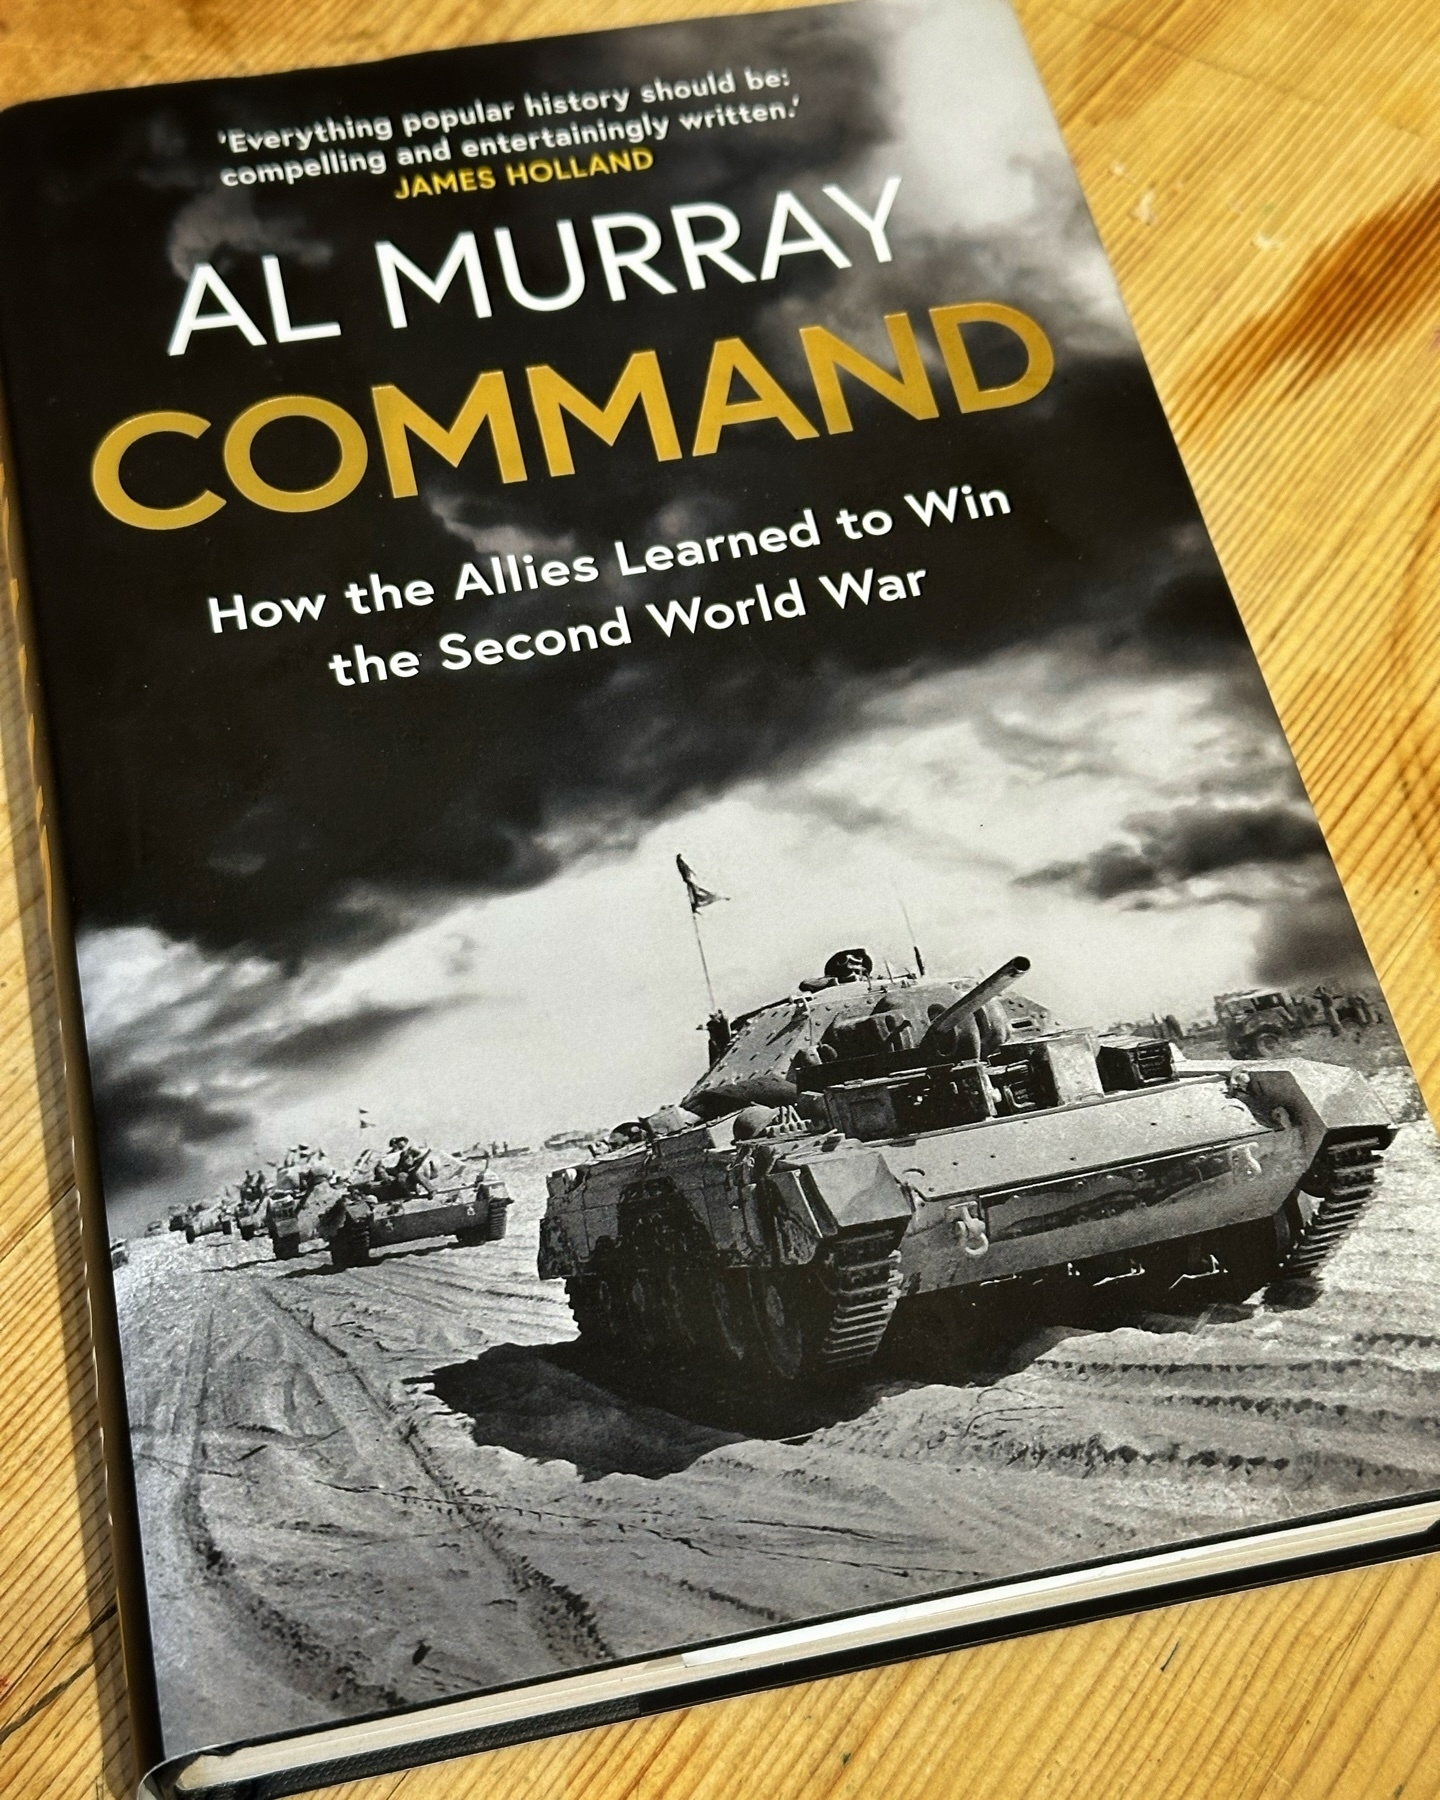 A book cover titled "COMMAND: How the Allies Learned to Win the Second World War" by Al Murray, featuring a black-and-white photo of a convoy of tanks rolling through a rugged terrain.